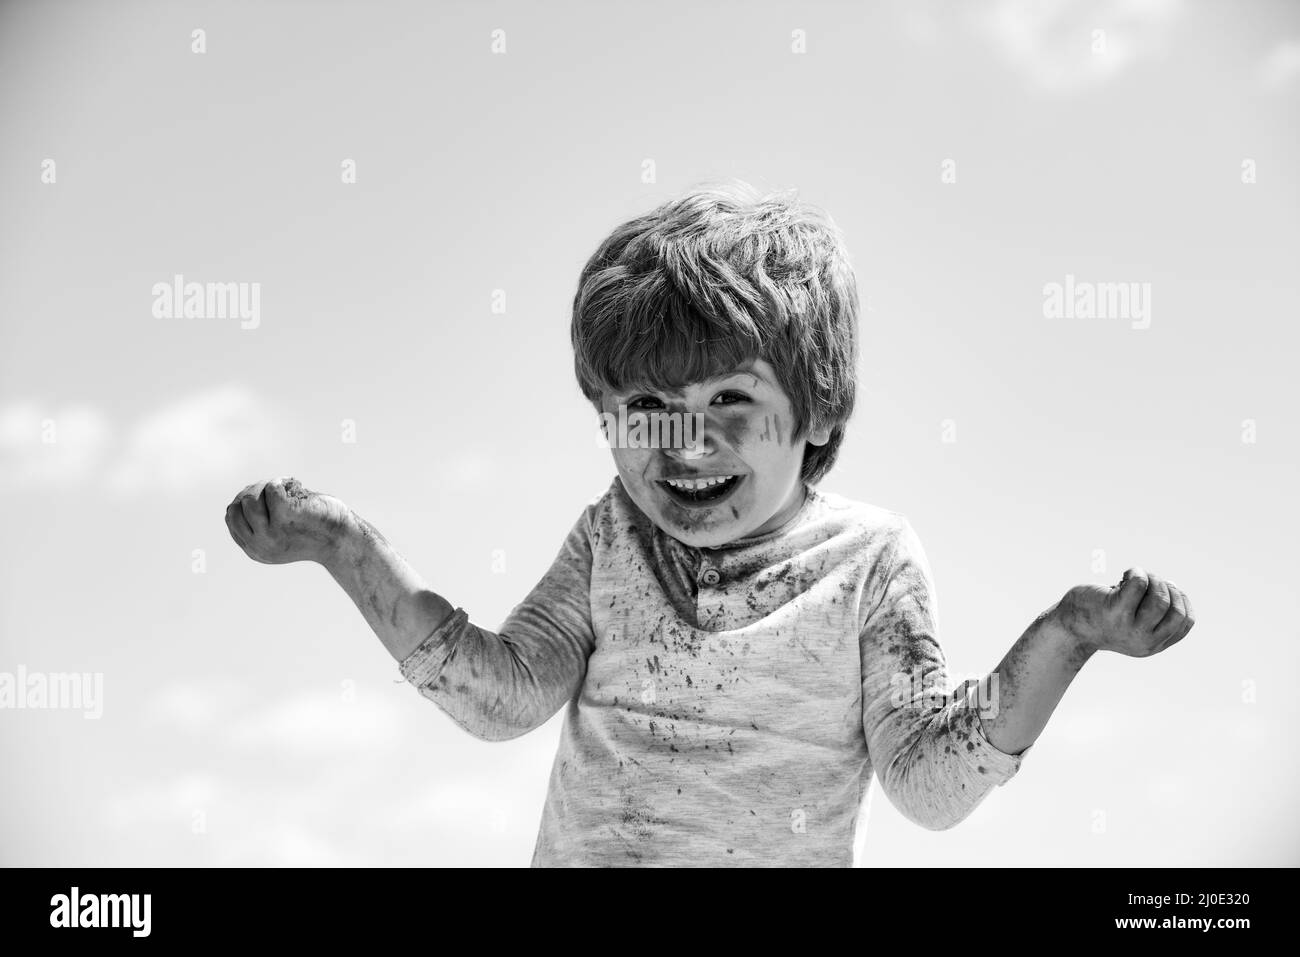 Kids with painted faces. Portrait of funny child. Stock Photo